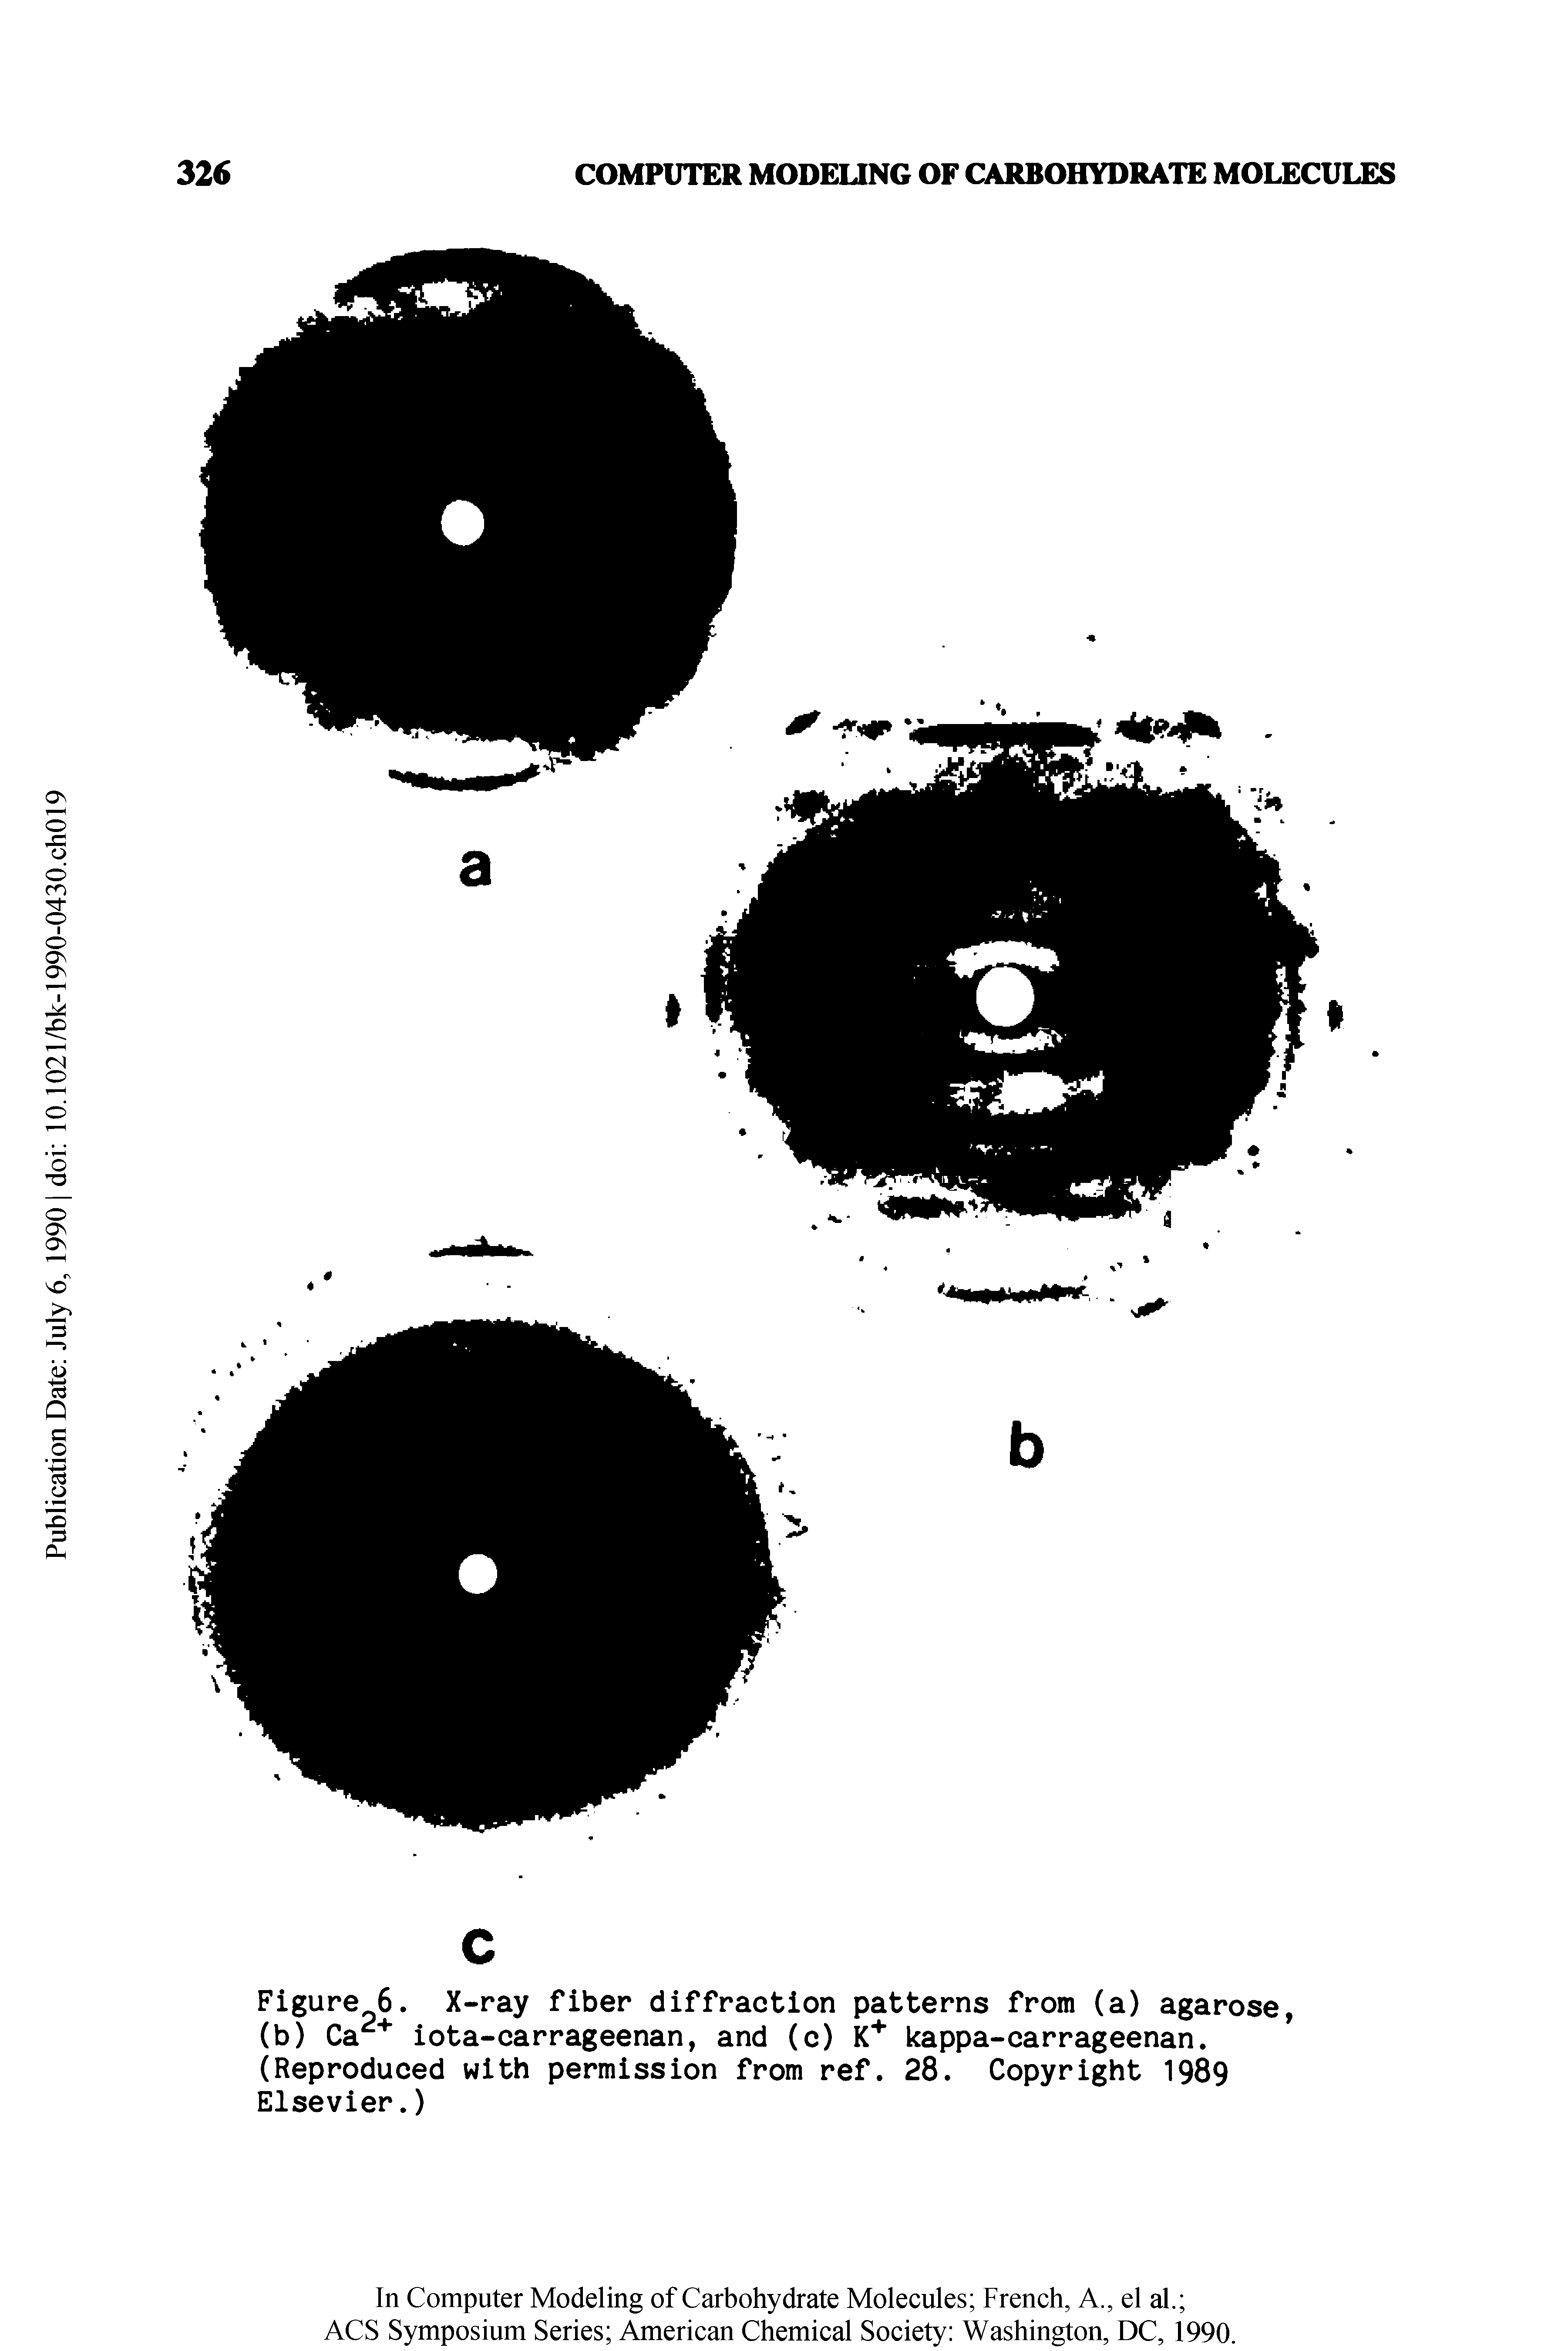 Figure 6. X-ray fiber diffraction patterns from (a) agarose, (b) Ca " iota-carrageenan, and (c) K " kappa-carrageenan. (Reproduced with permission from ref. 28. Copyright 1989 Elsevier.)...